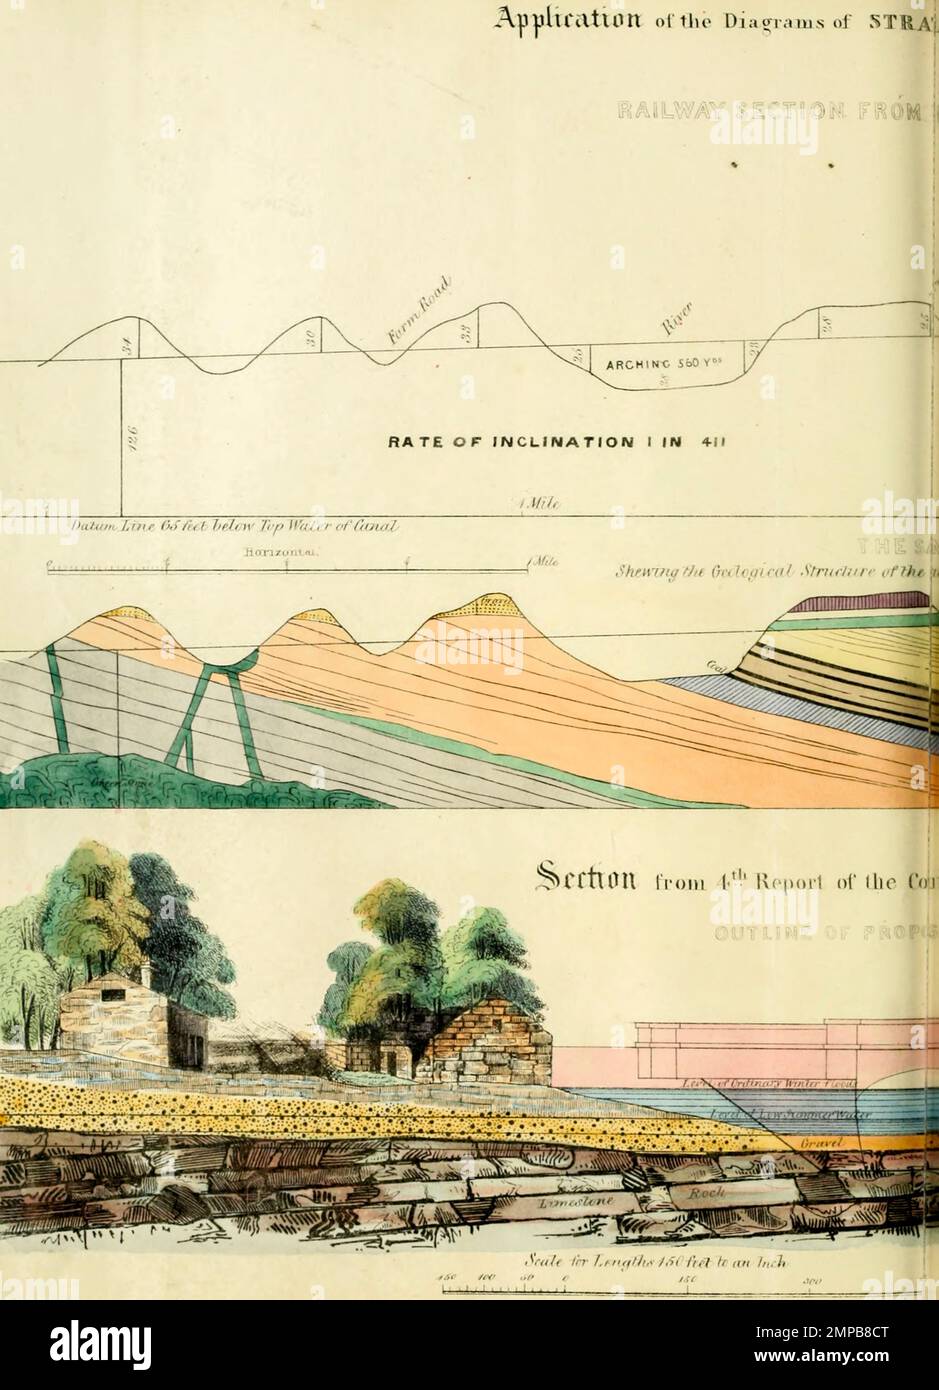 Railway section from A hand-book for mapping, engineering, and architectural drawing : in which maps of all descriptions are analyzed, and their several uses fully explained ; intended for the use of civil engineers, architects, and surveyors, also for naval and military academies, engineering schools and colleges, and draughtsmen ; illustrated with forty-three large plates and thirty-nine woodcuts, among which will be found examples of a parliamentary railway plan, section, and cross sections, prepared in compliance with the standing orders of the House of Commons ; with plain instructions fo Stock Photo